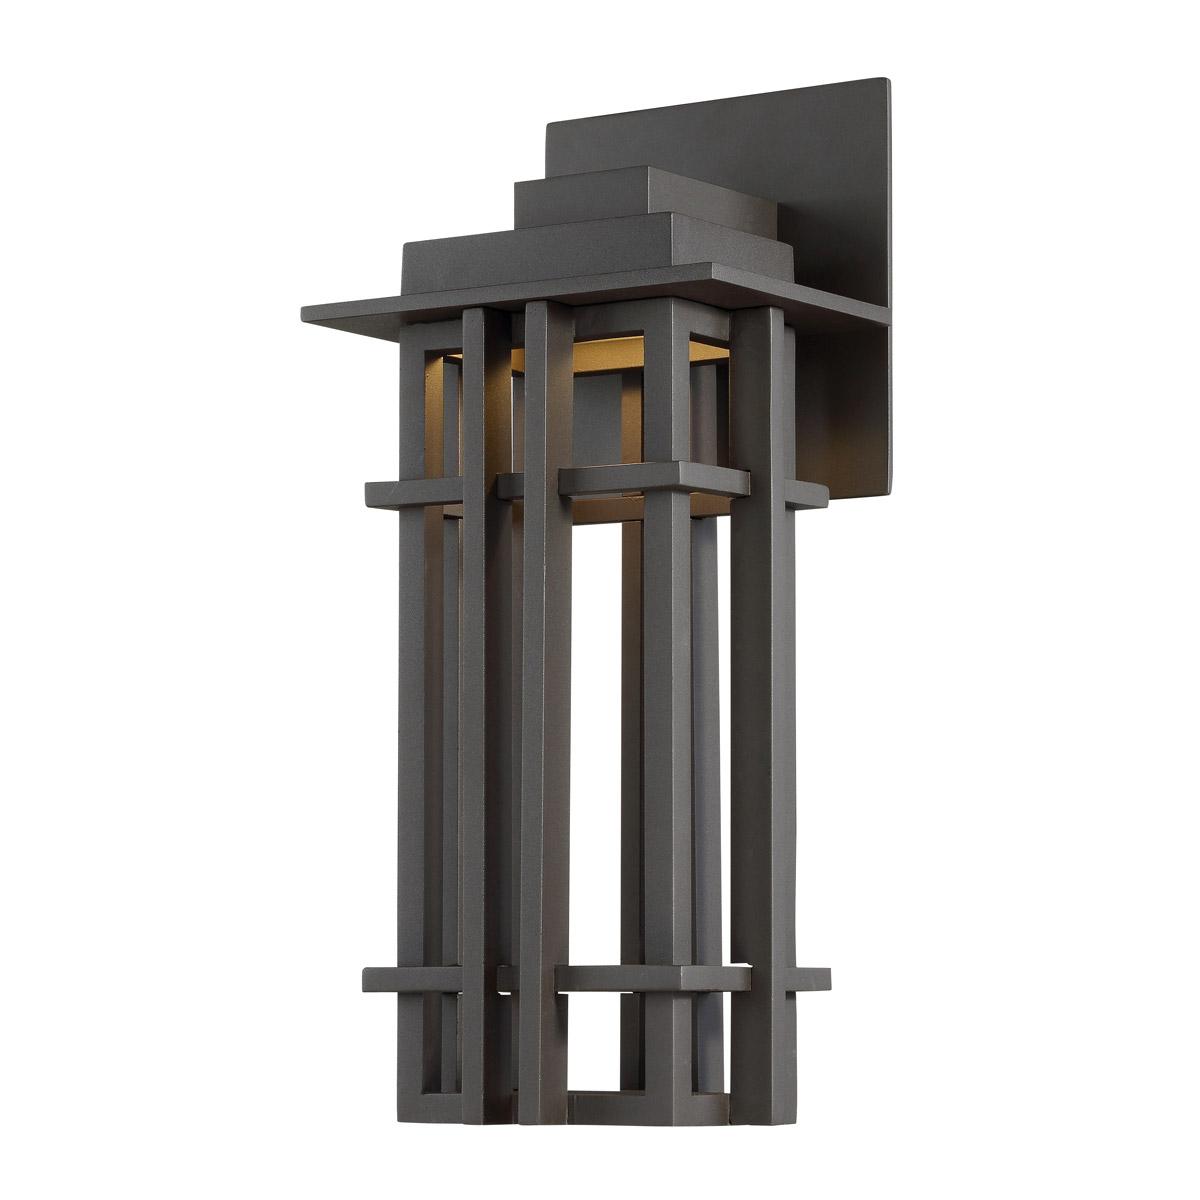 Nest 16 in. LED Outdoor Wall Sconce 280 Lumens 3000K Bronze Finish